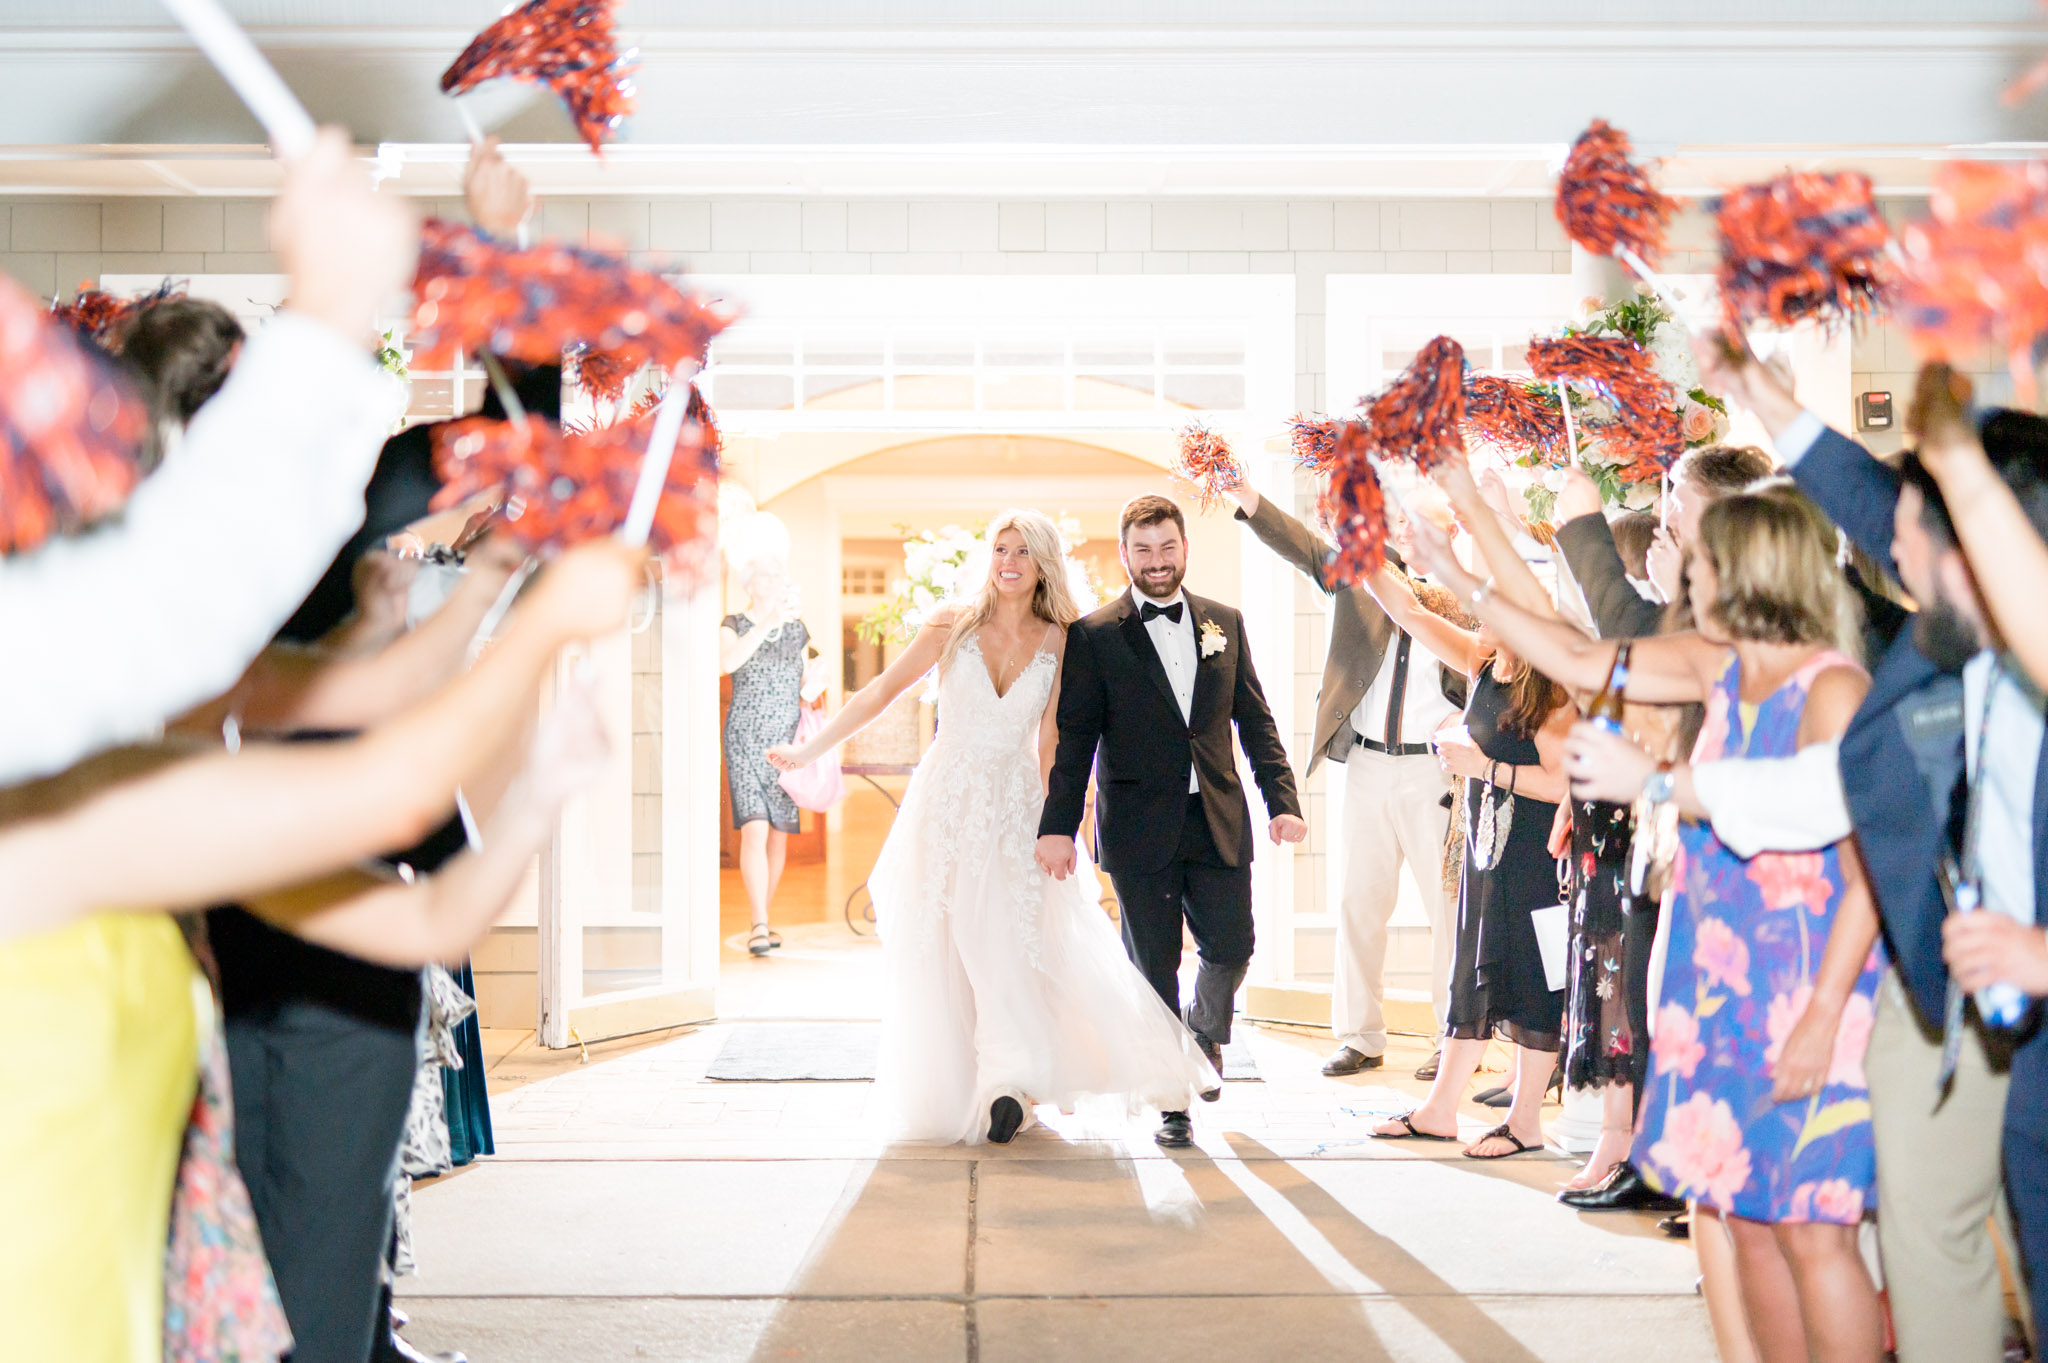 Bride and groom leave reception with guests cheering.